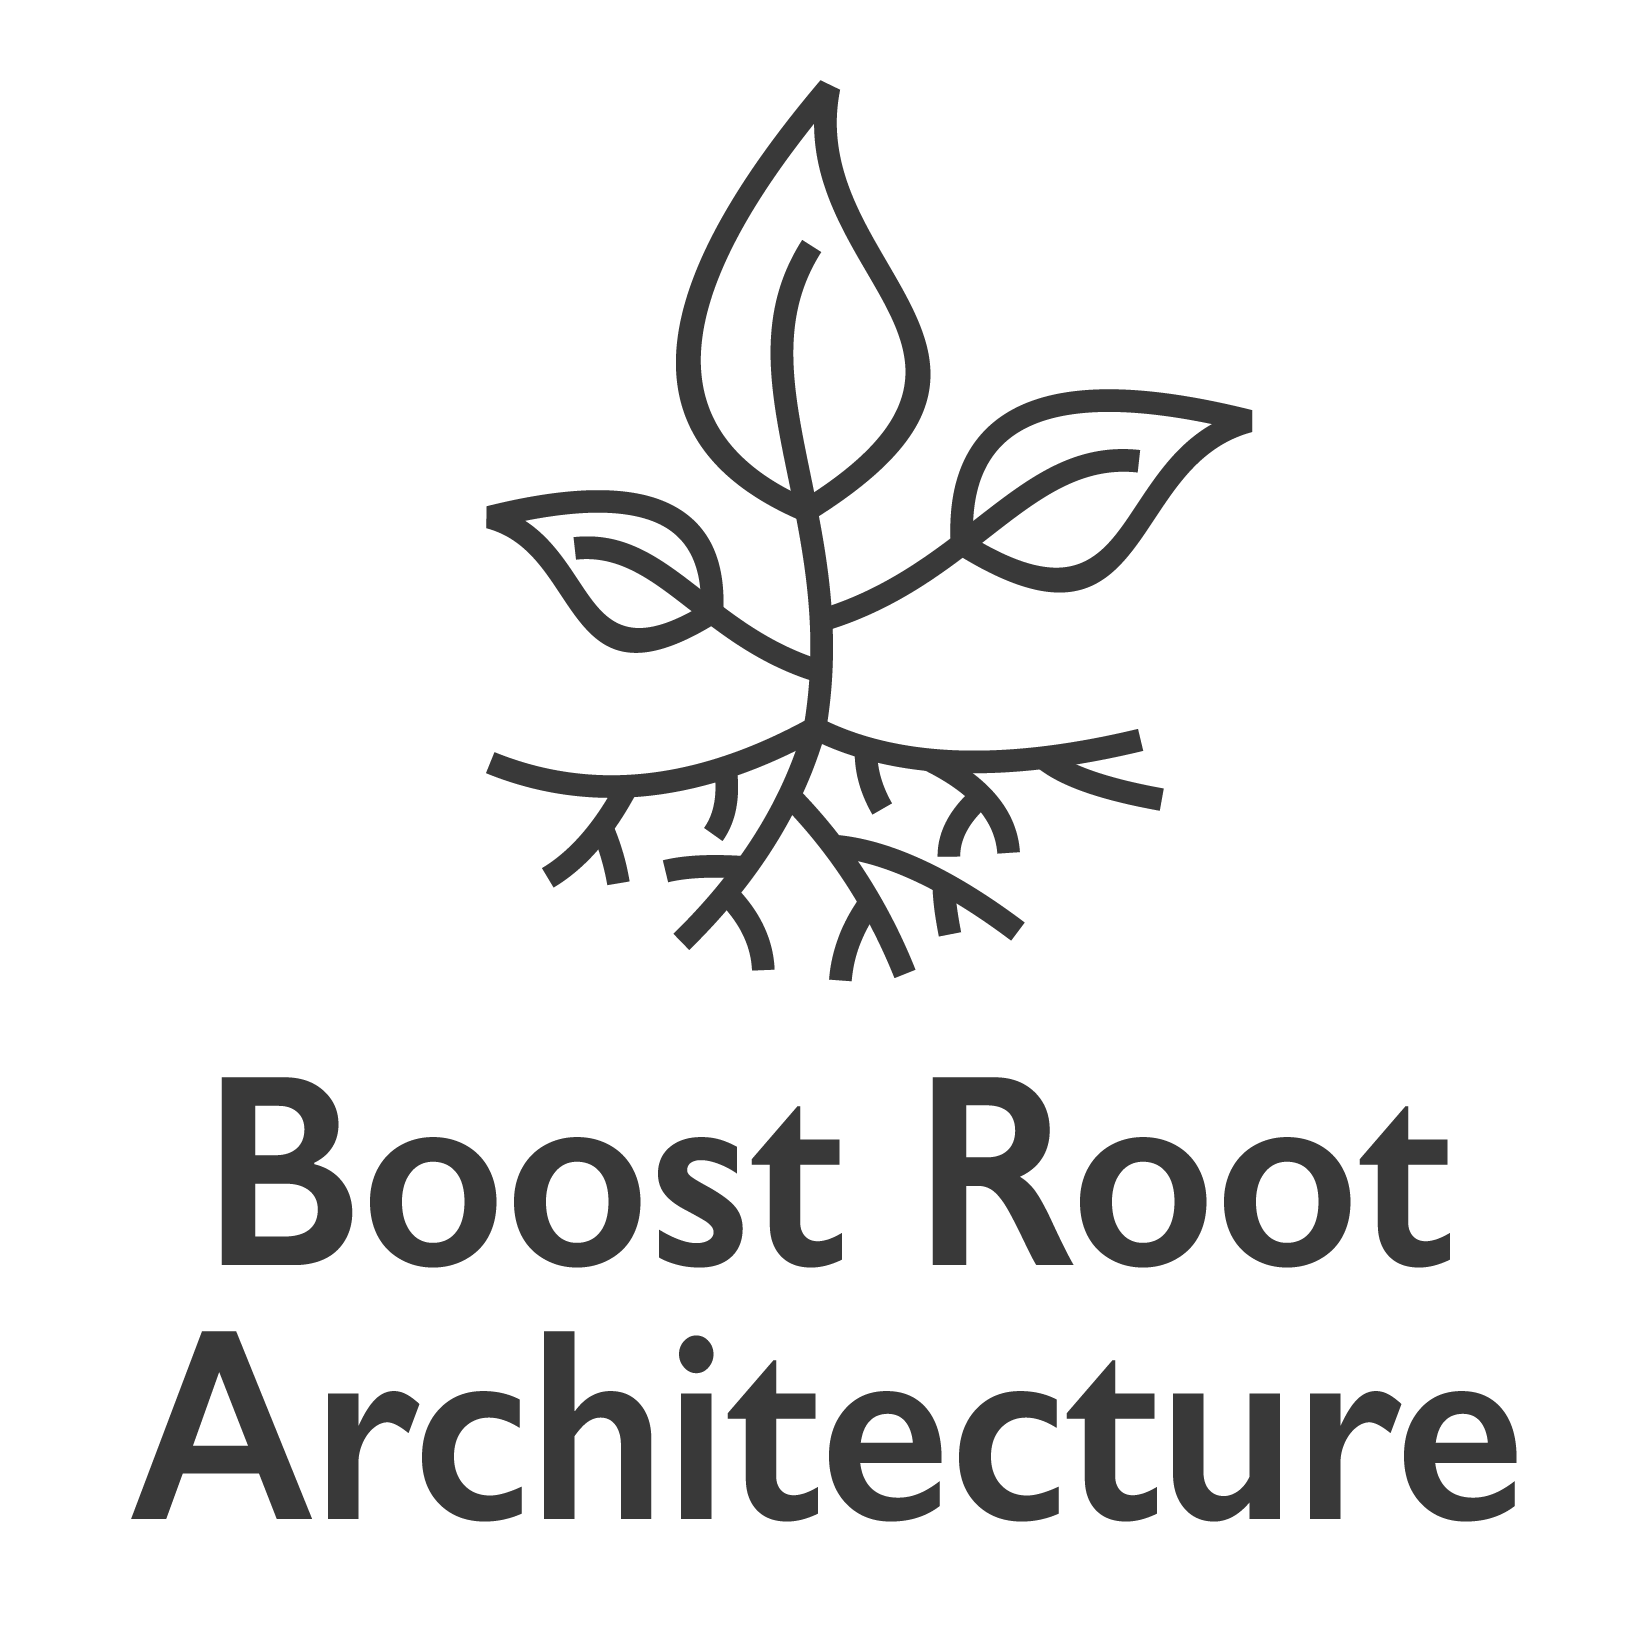 Boost Root Architecture